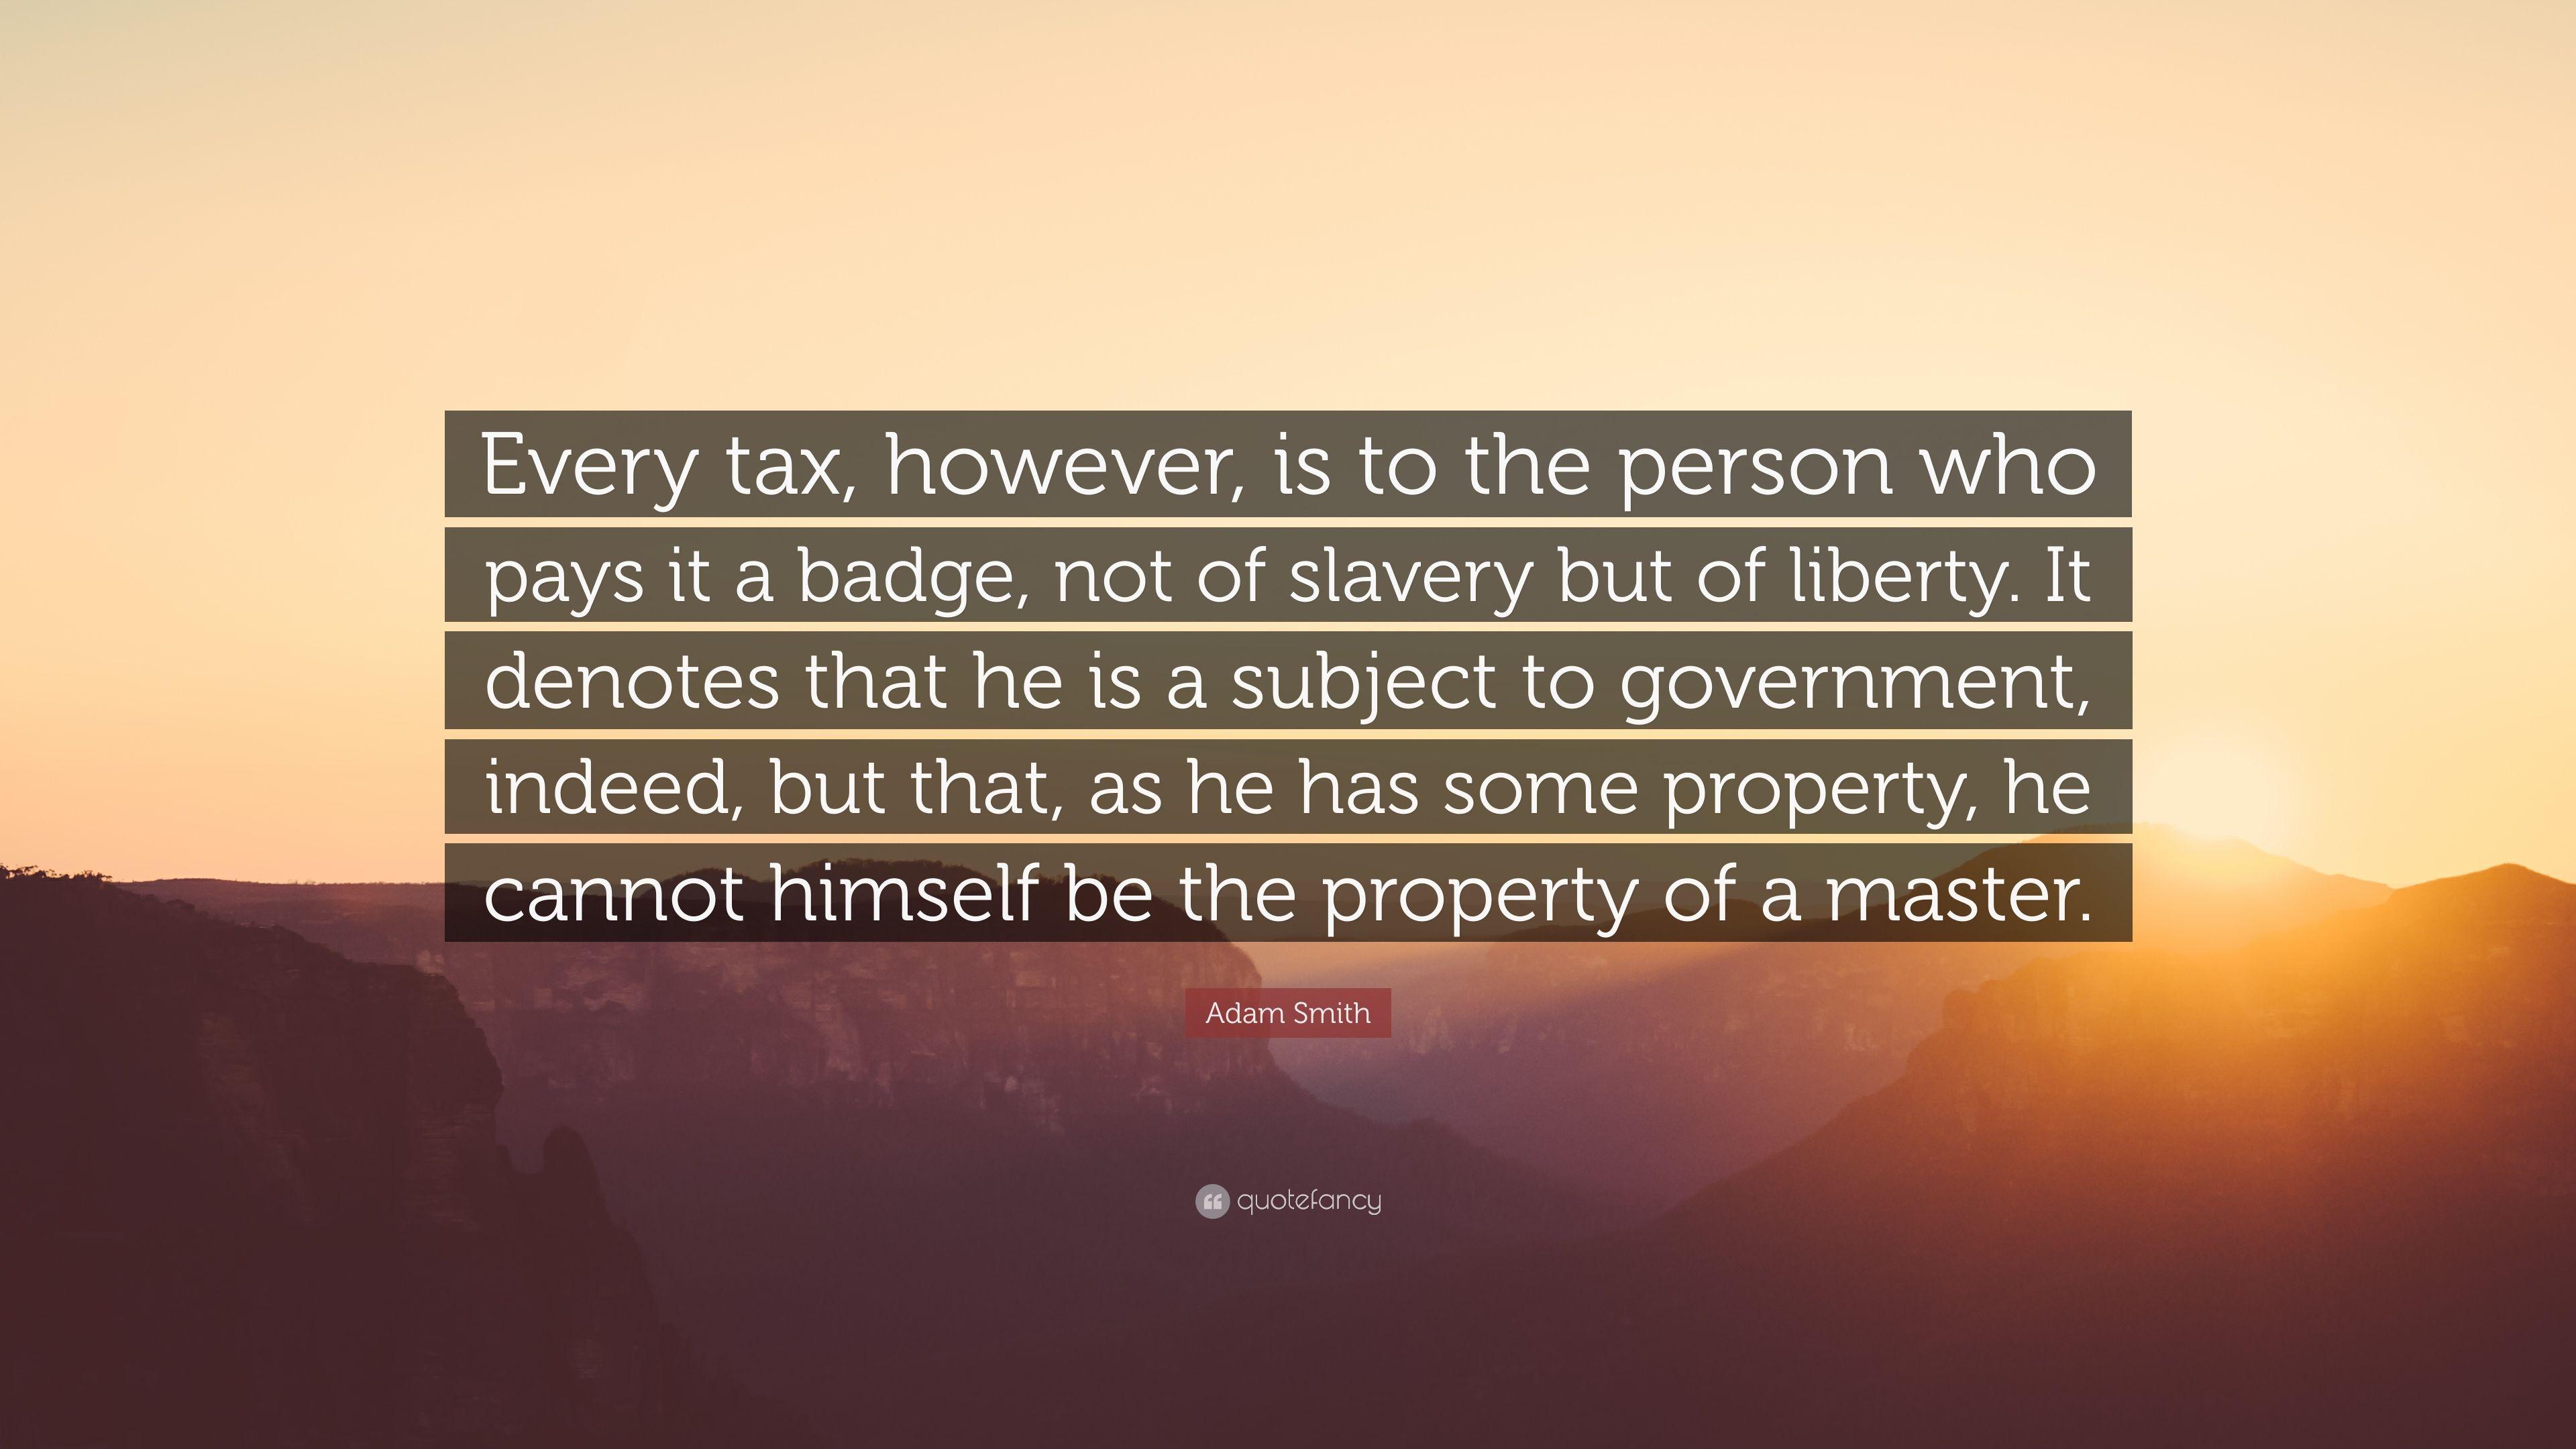 Adam Smith Quote: “Every tax, however, is to the person who pays it